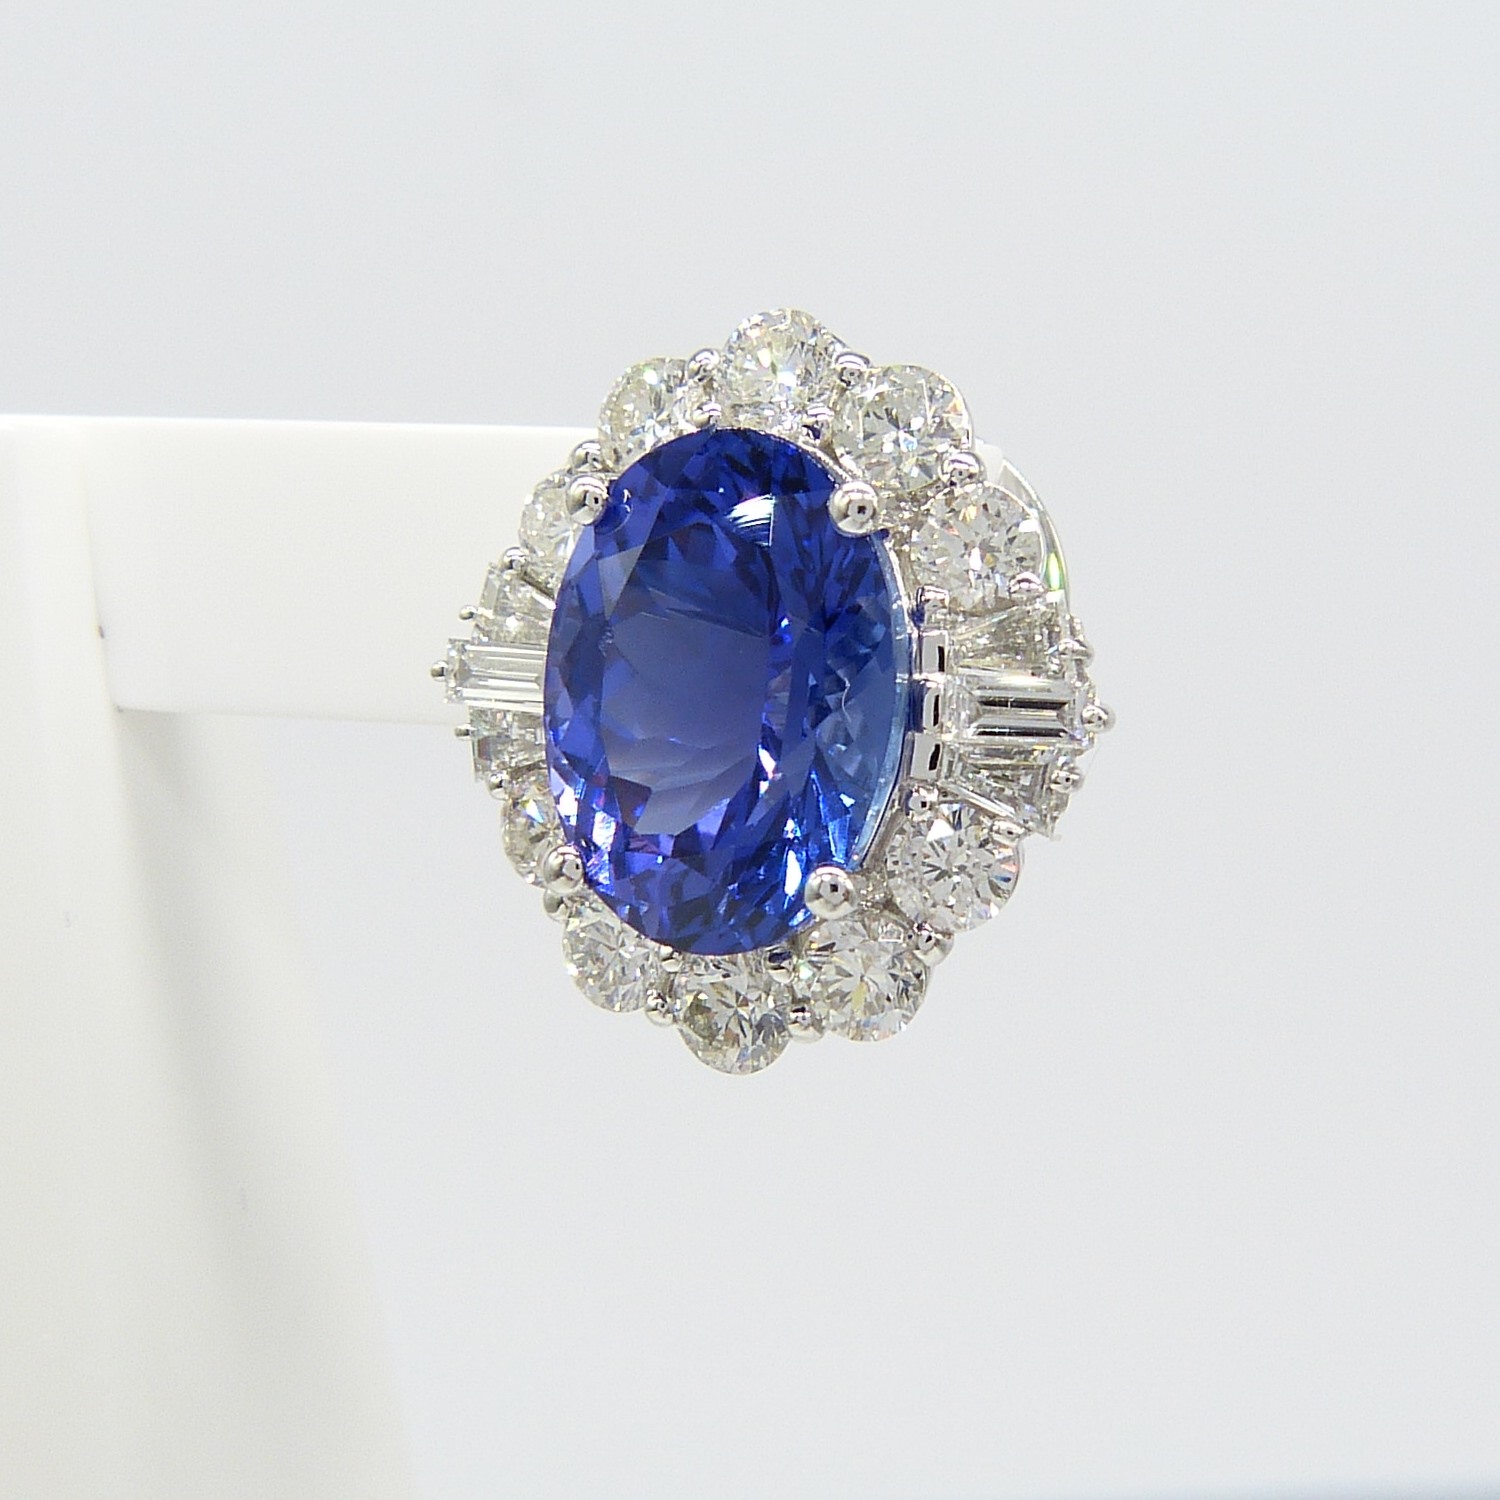 A large pair of loupe-clean tanzanite and diamond cluster earrings in 18ct white gold, certificated - Image 7 of 9